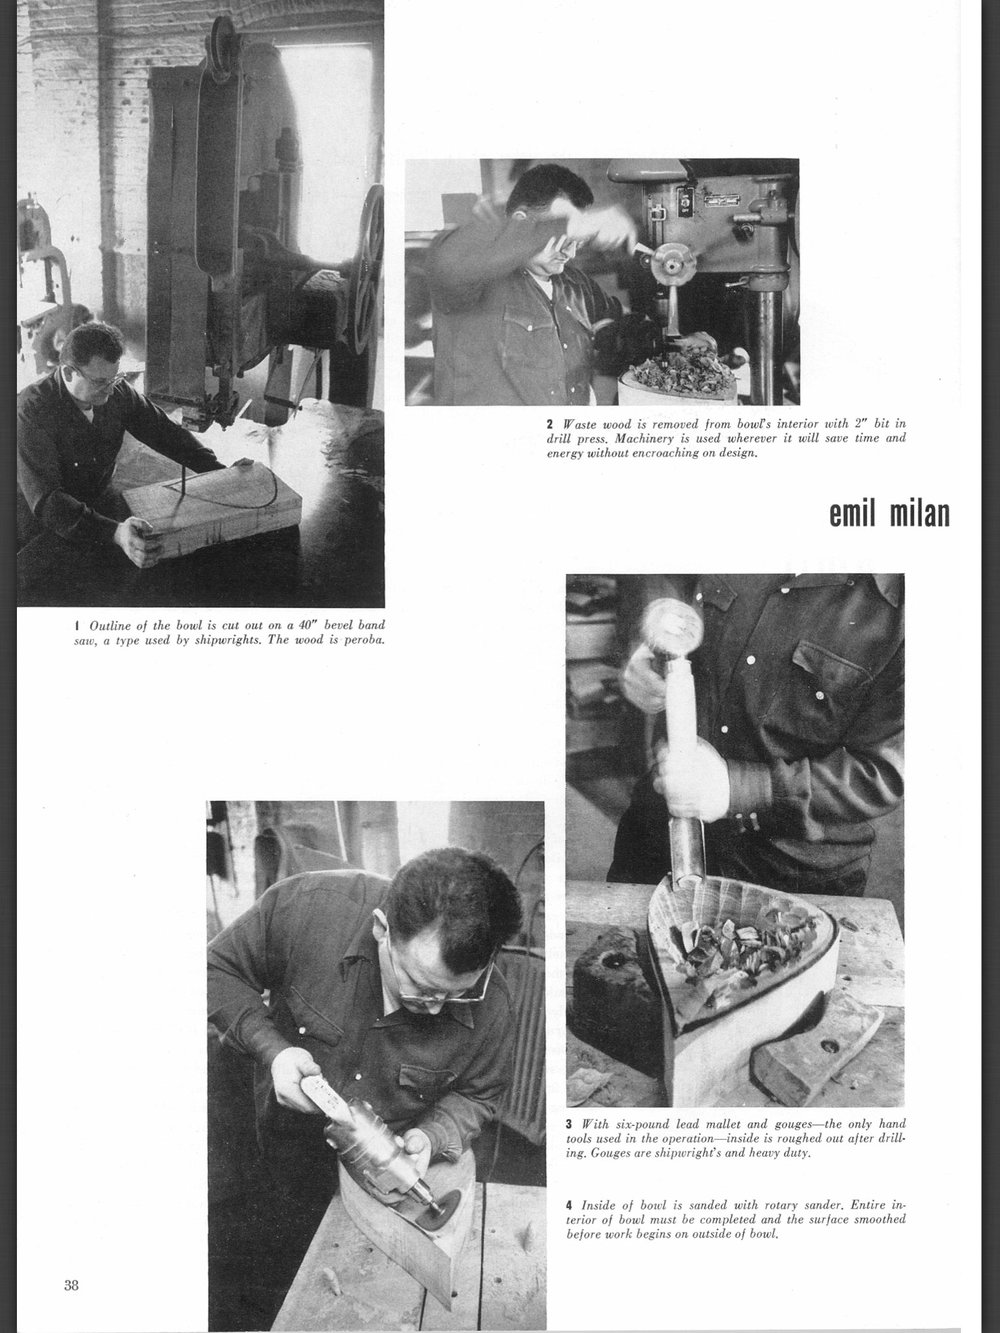 Photos of Emil’s work process in the July 1957 issue of the ACC’s  Craft Horizons  magazine.  Photos by Raymond Jacobs, used by permission.&nbsp; Page layout courtesy of the American Craft Council.